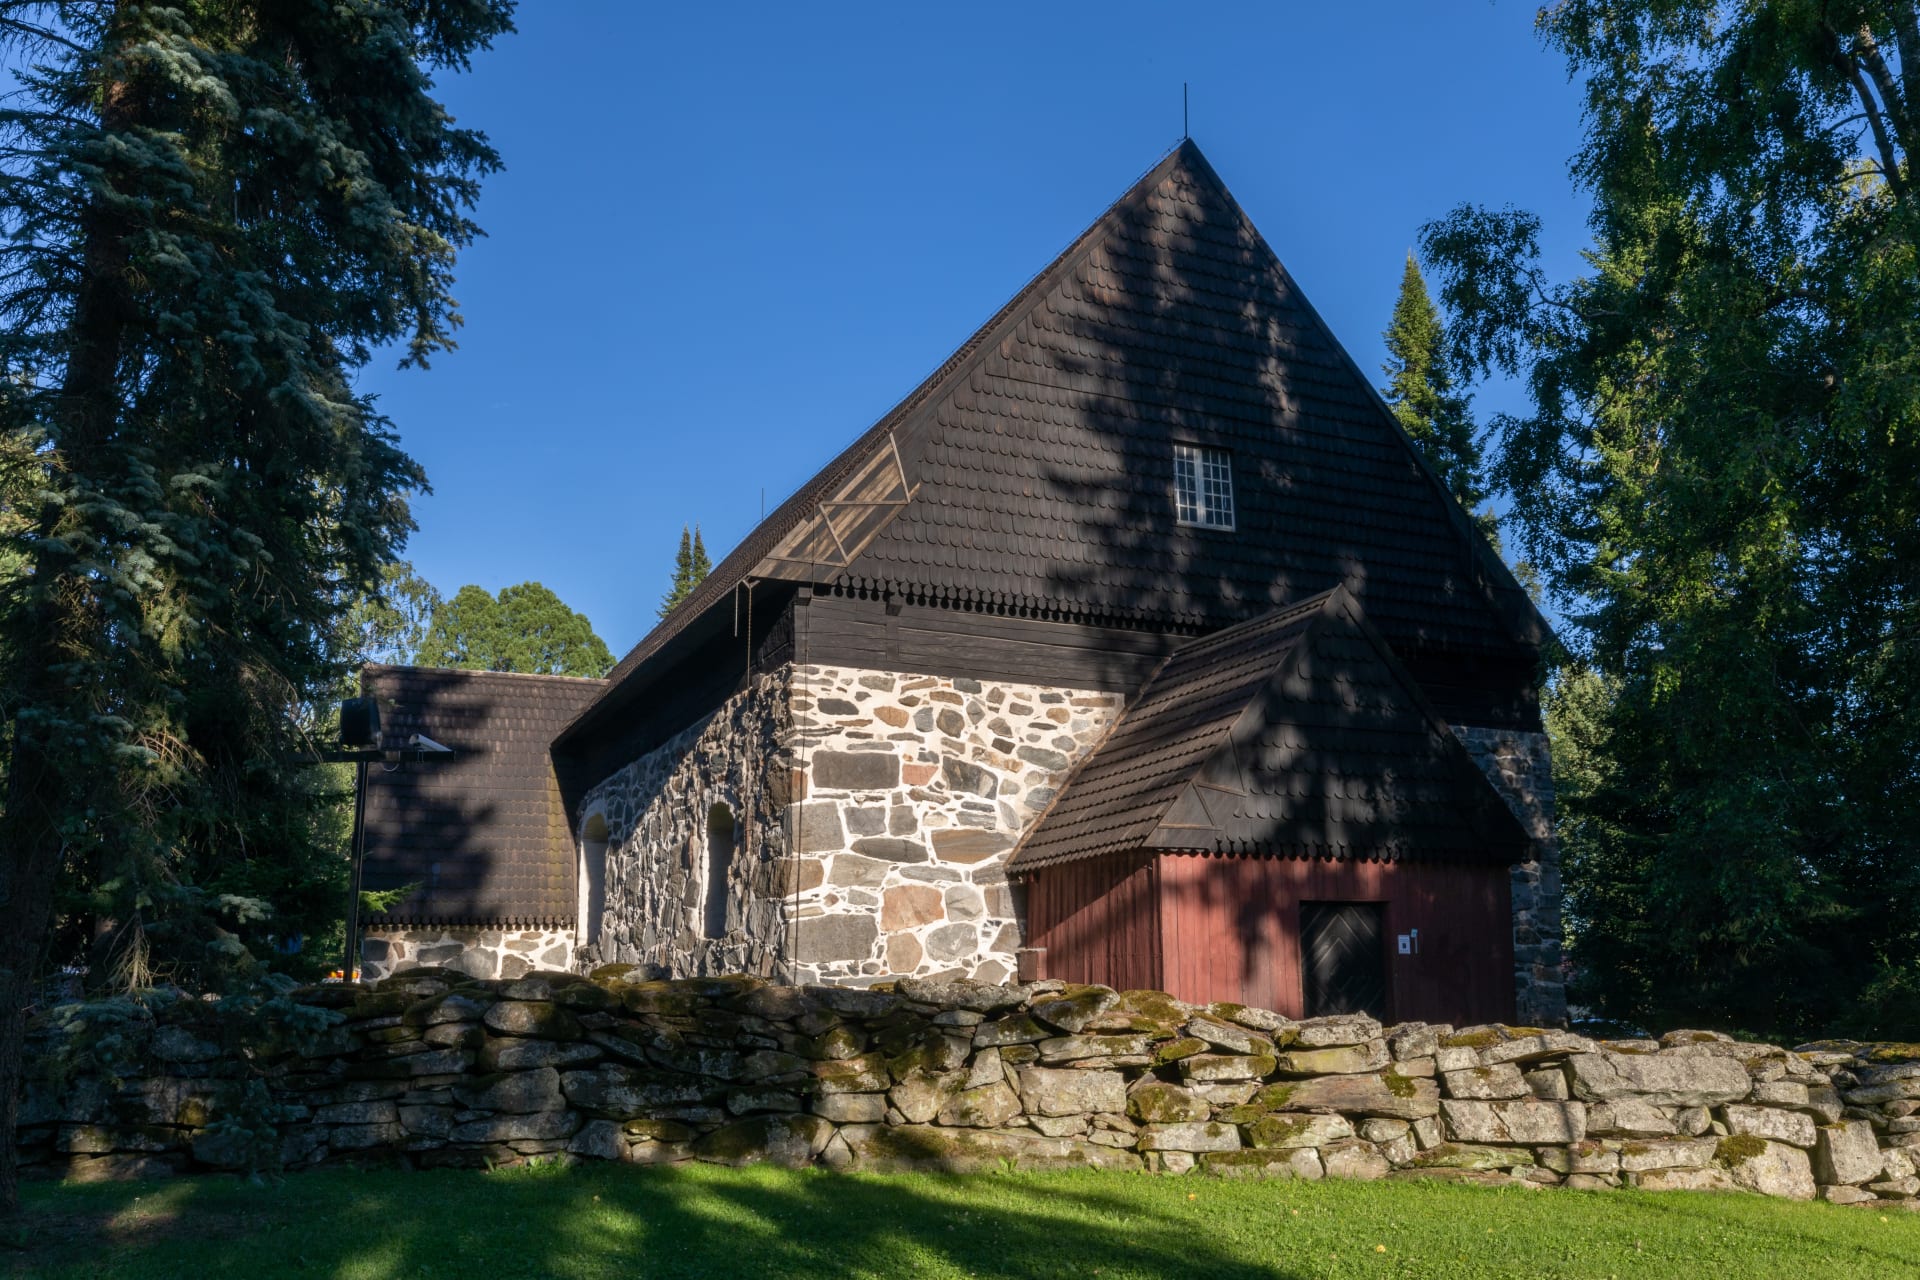 The medieval church is surrounded by a stone wall.